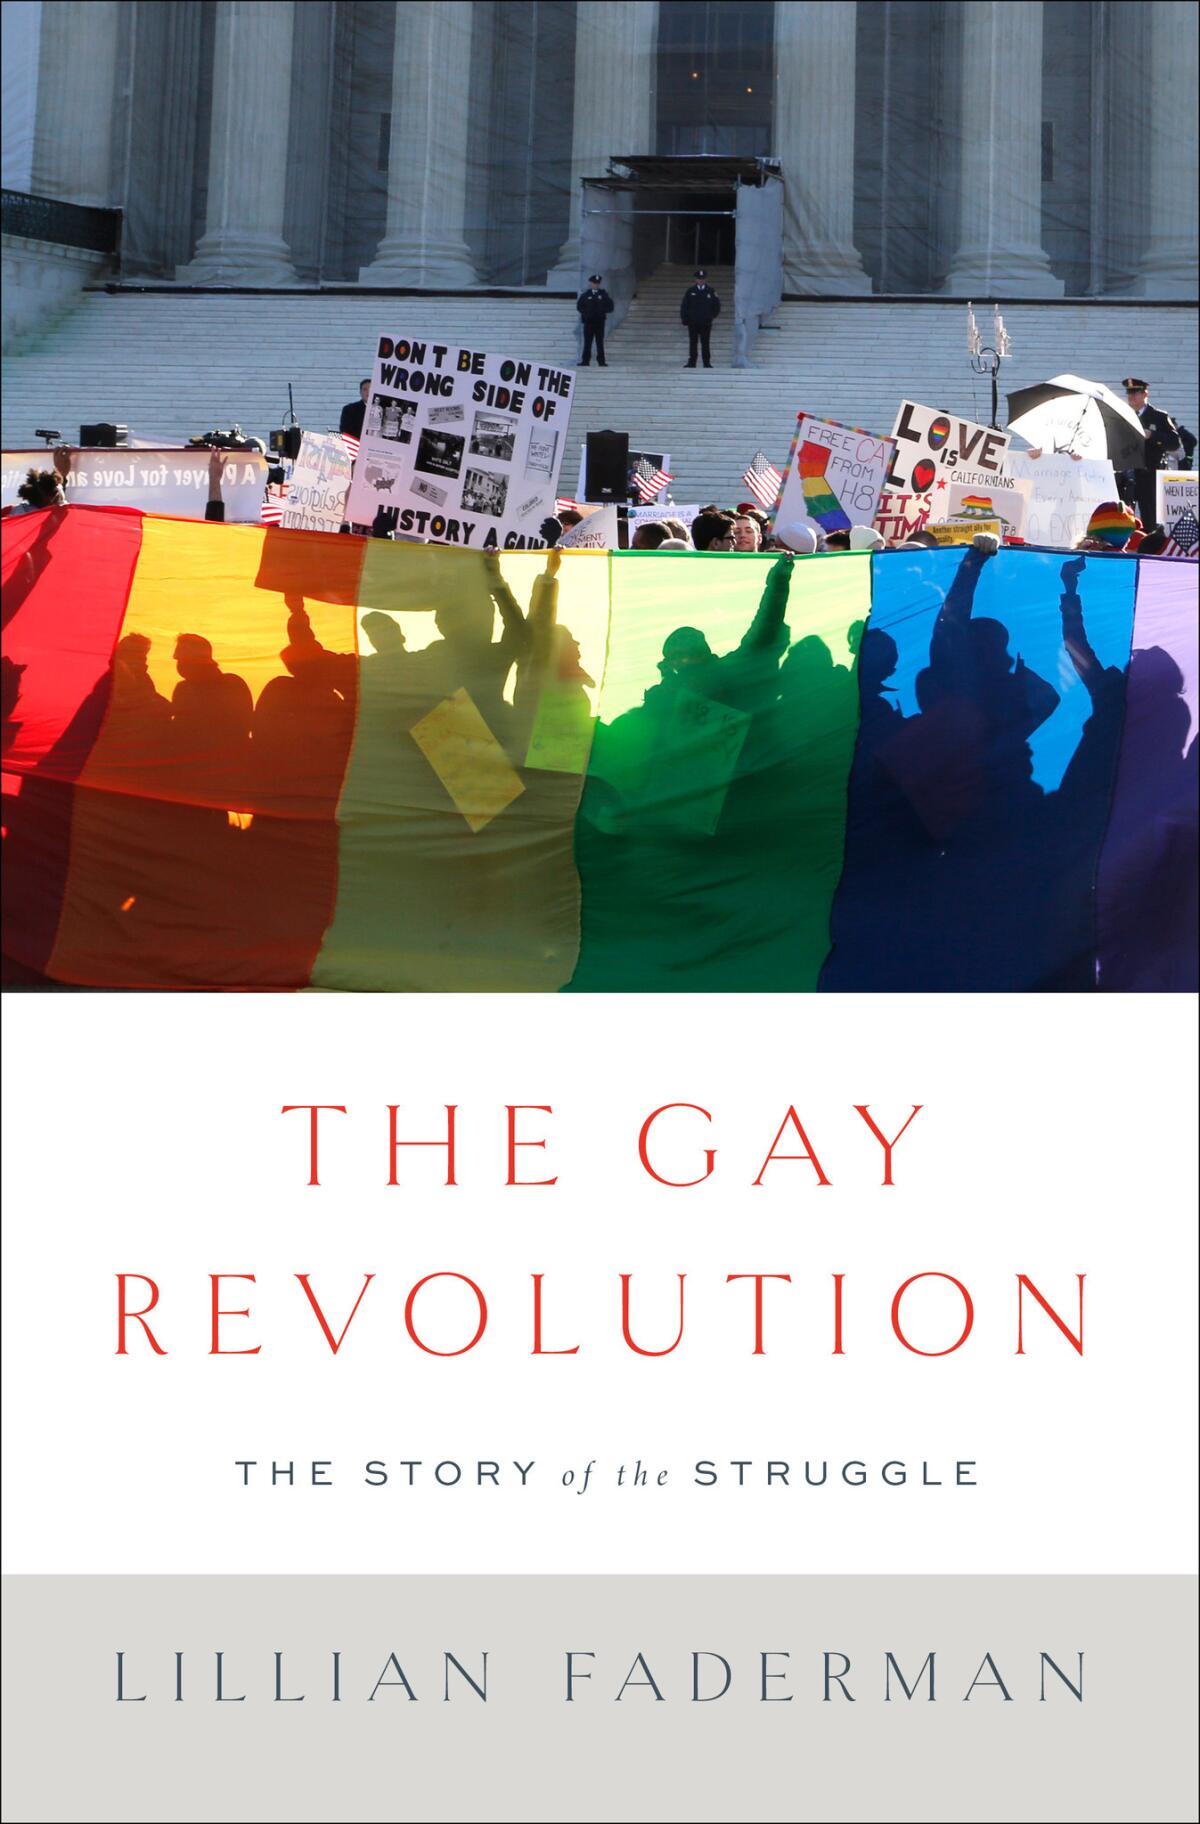 "The Gay Revolution: The Story of the Struggle" by Lillian Faderman